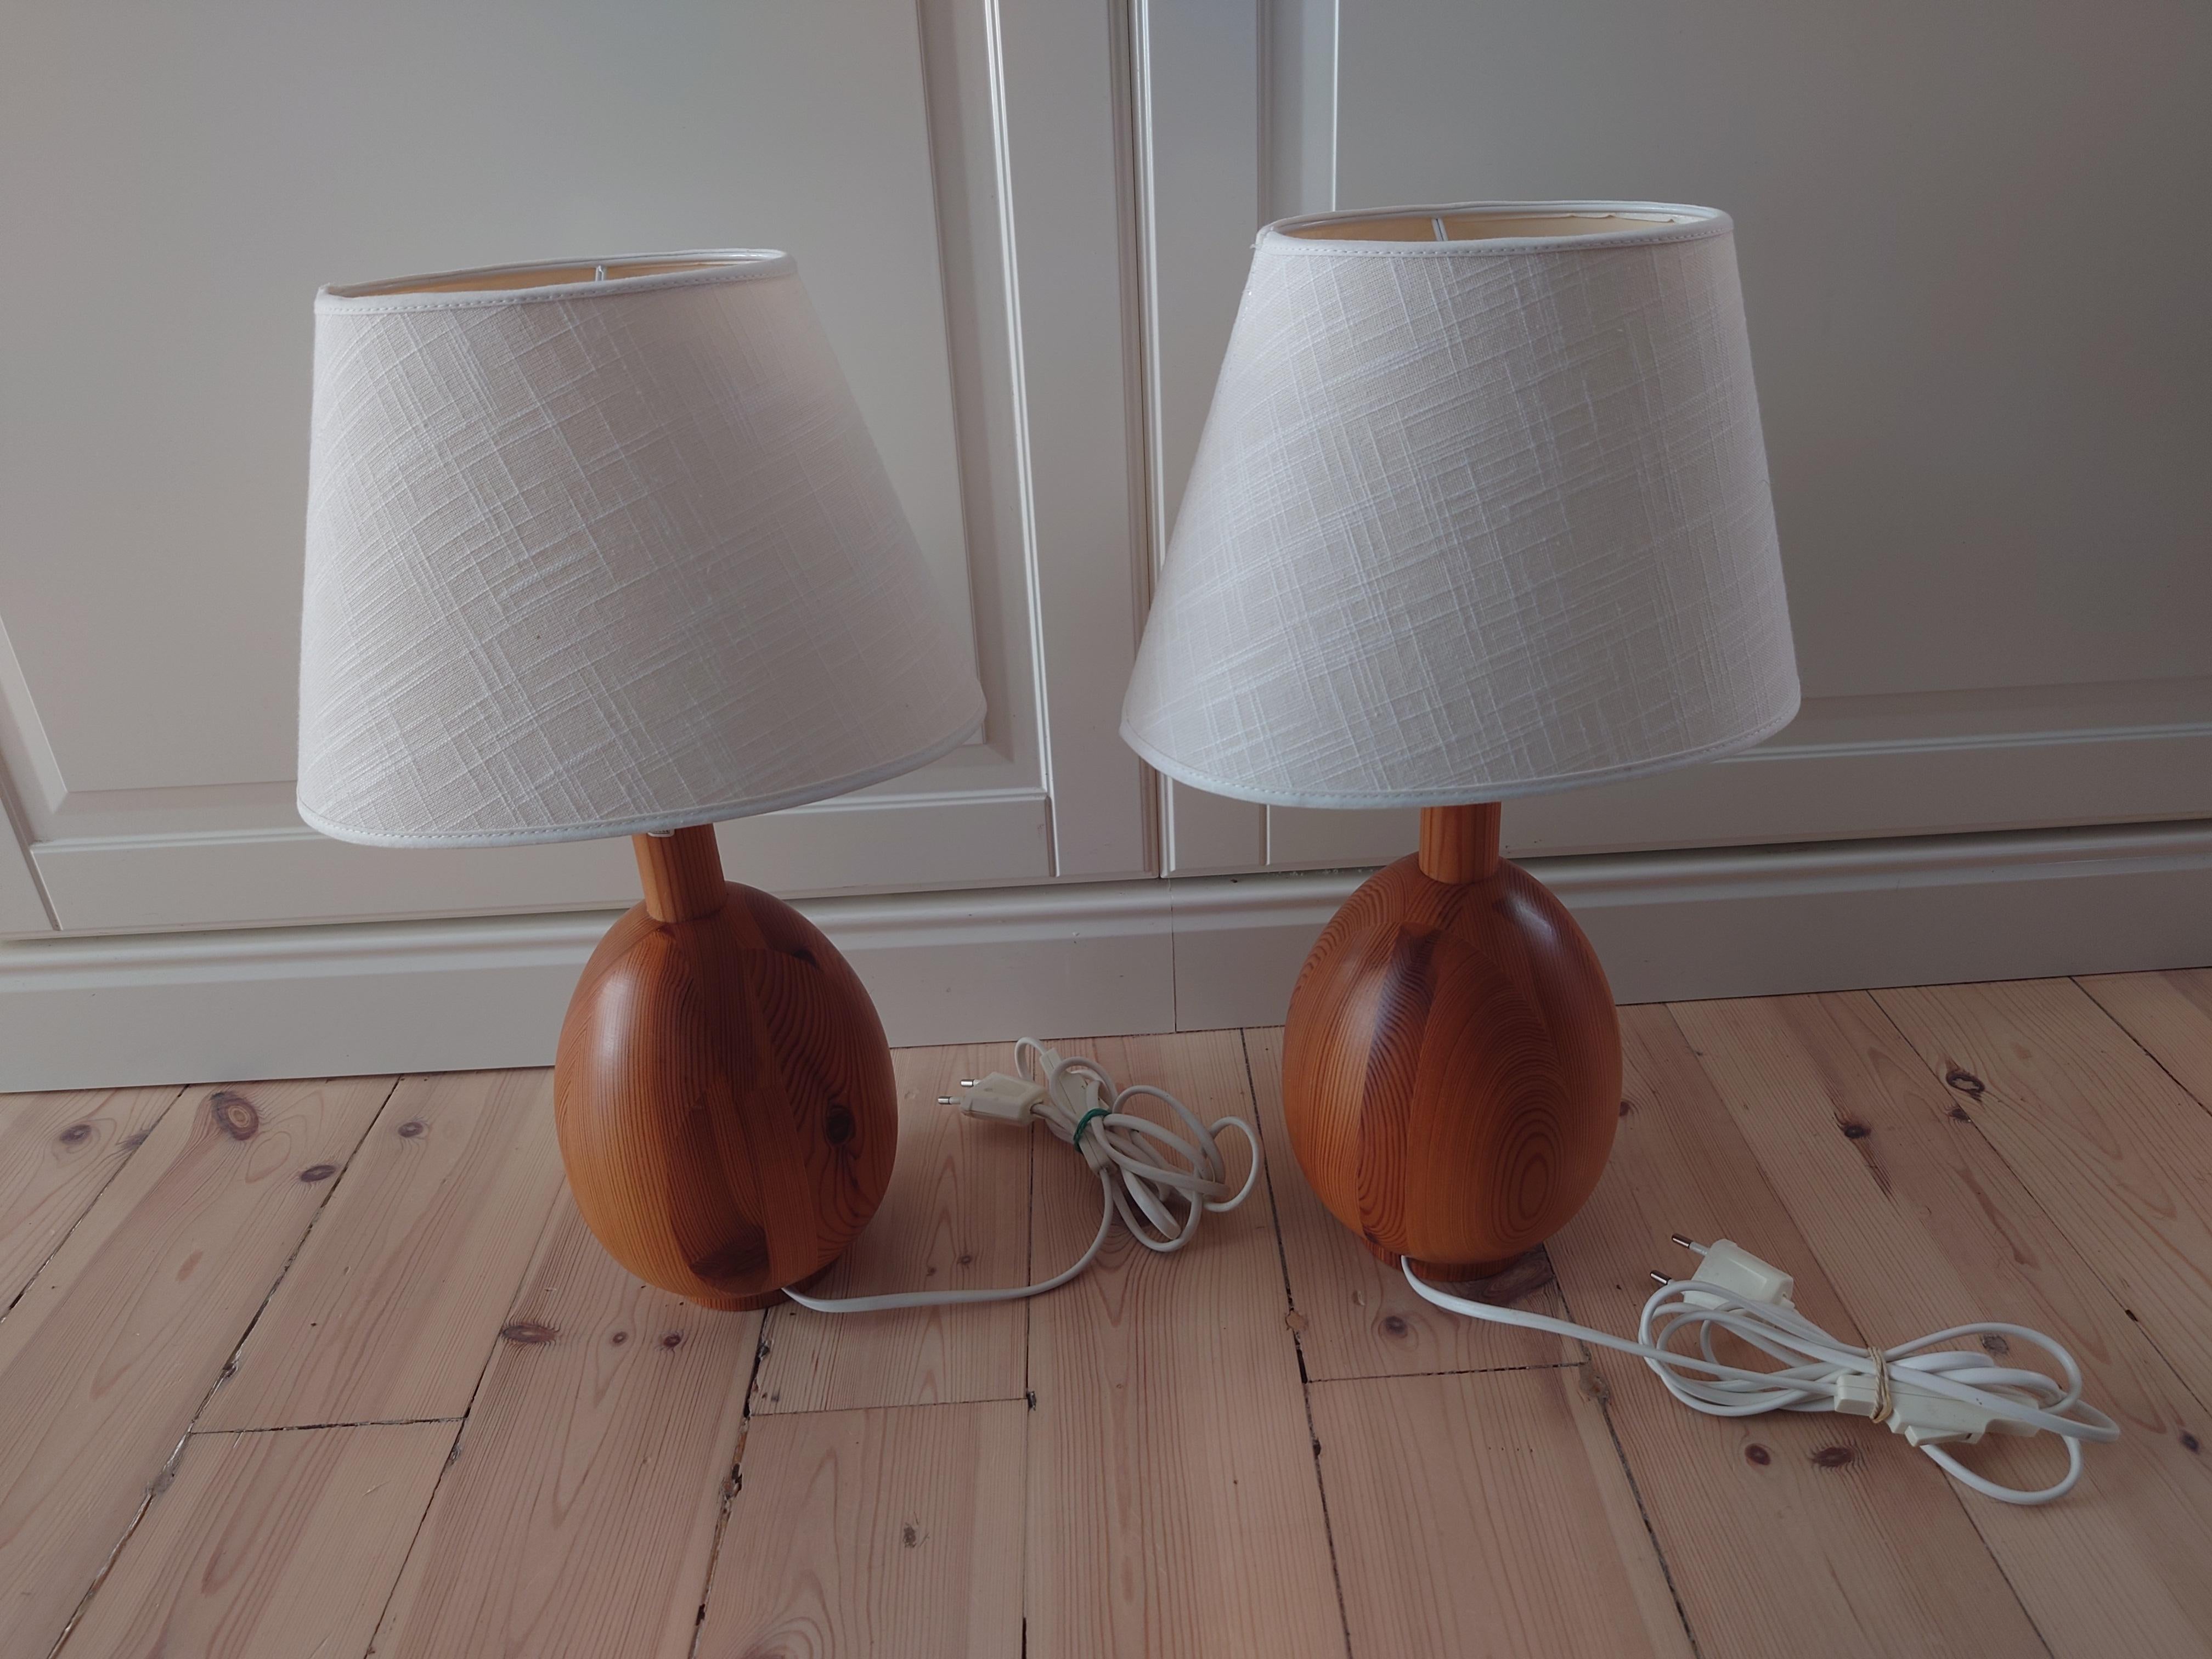 Late 20th Century A pair Markslöjd Minimalist Table Lamps, Solid Pine, Kinna, Sweden, c. 1970s For Sale